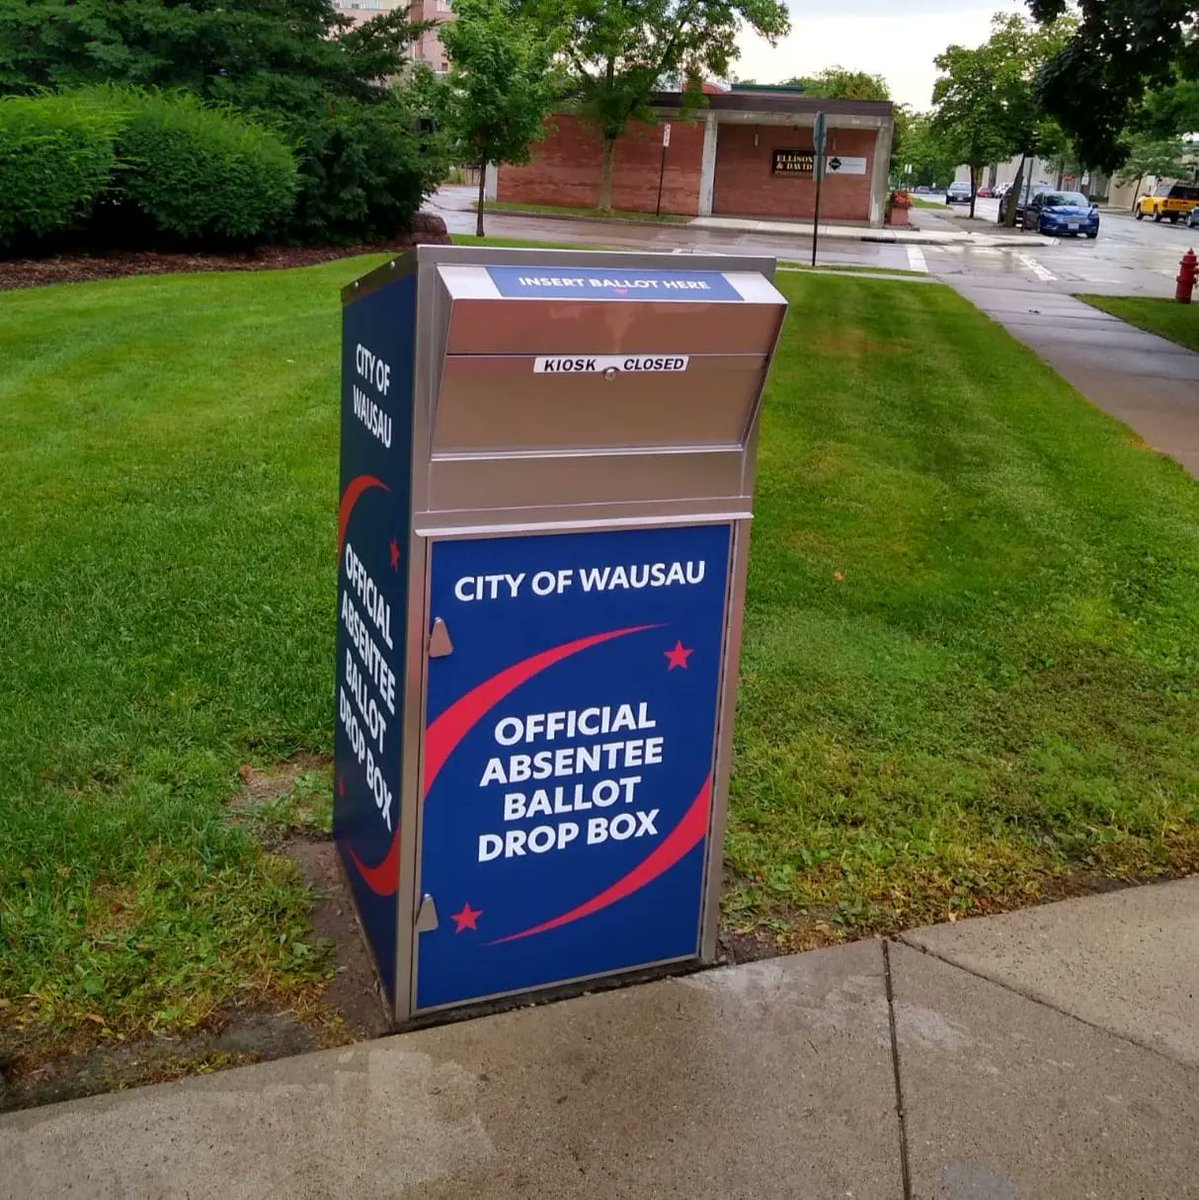  Drop boxes, in those states that provide them, are great! They give voters more options for returning ballots. But please don't create your own! Drop boxes are safe and secure only when provided by election officials.Keep holding Louis DeJoy's feet to the fire.  #USPS1/4